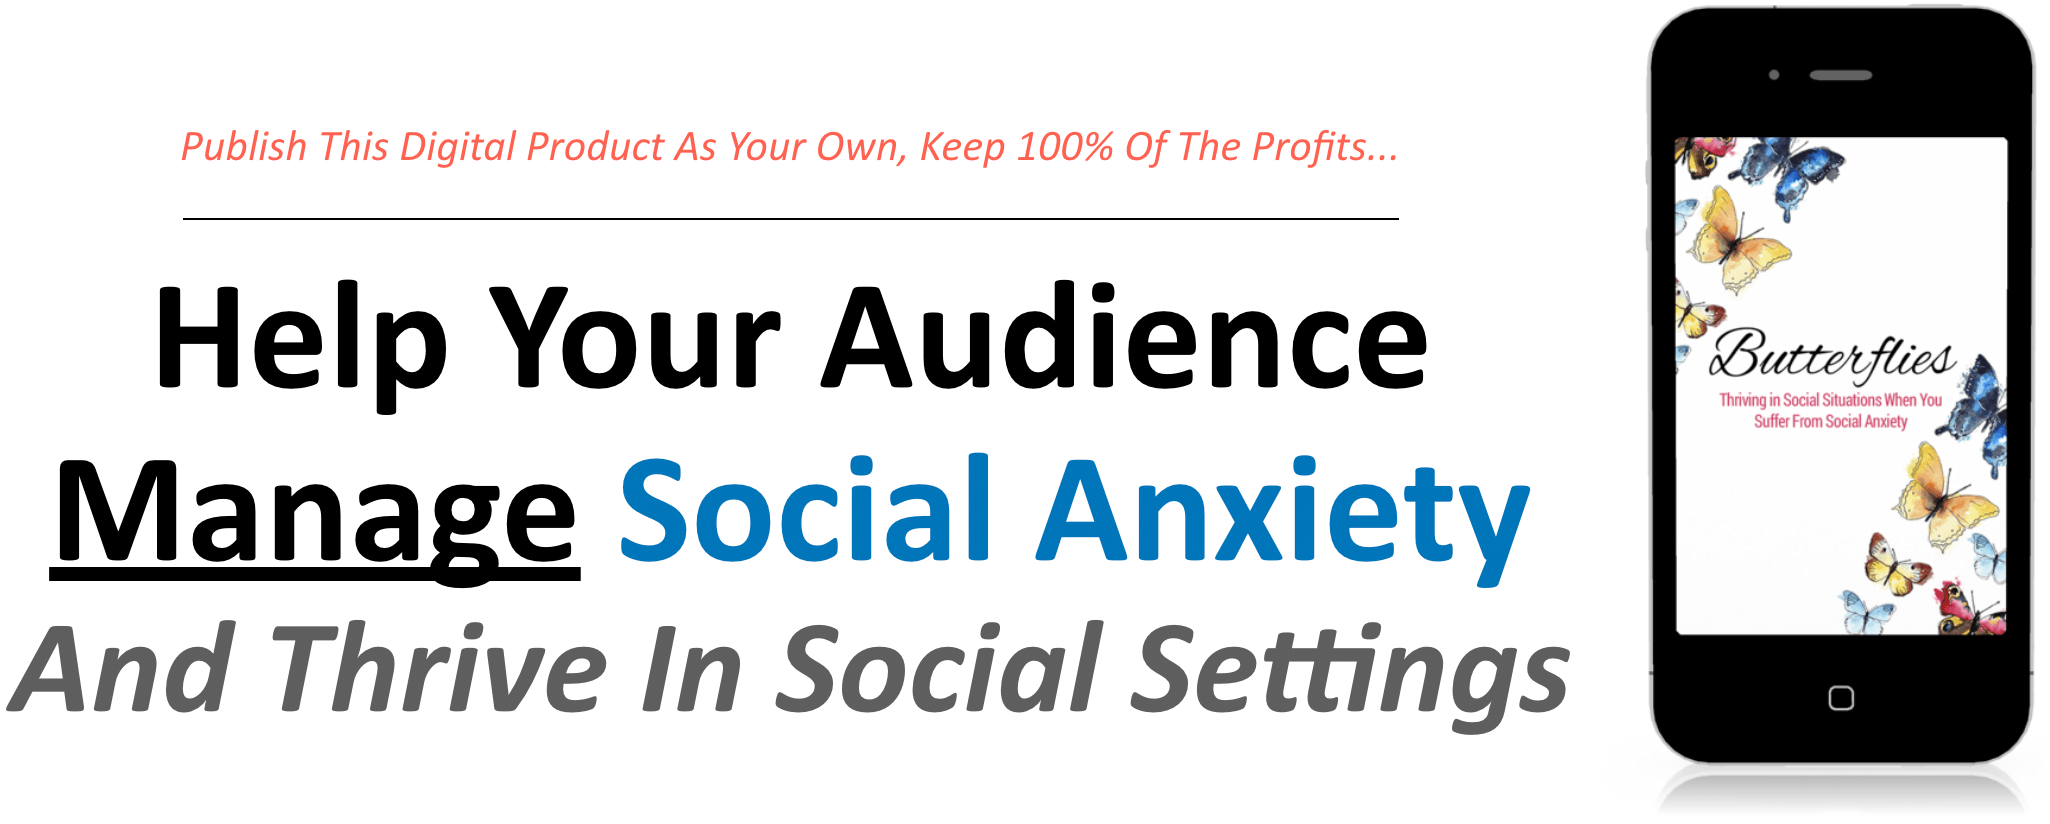 [GET] Beat Social Anxiety Download